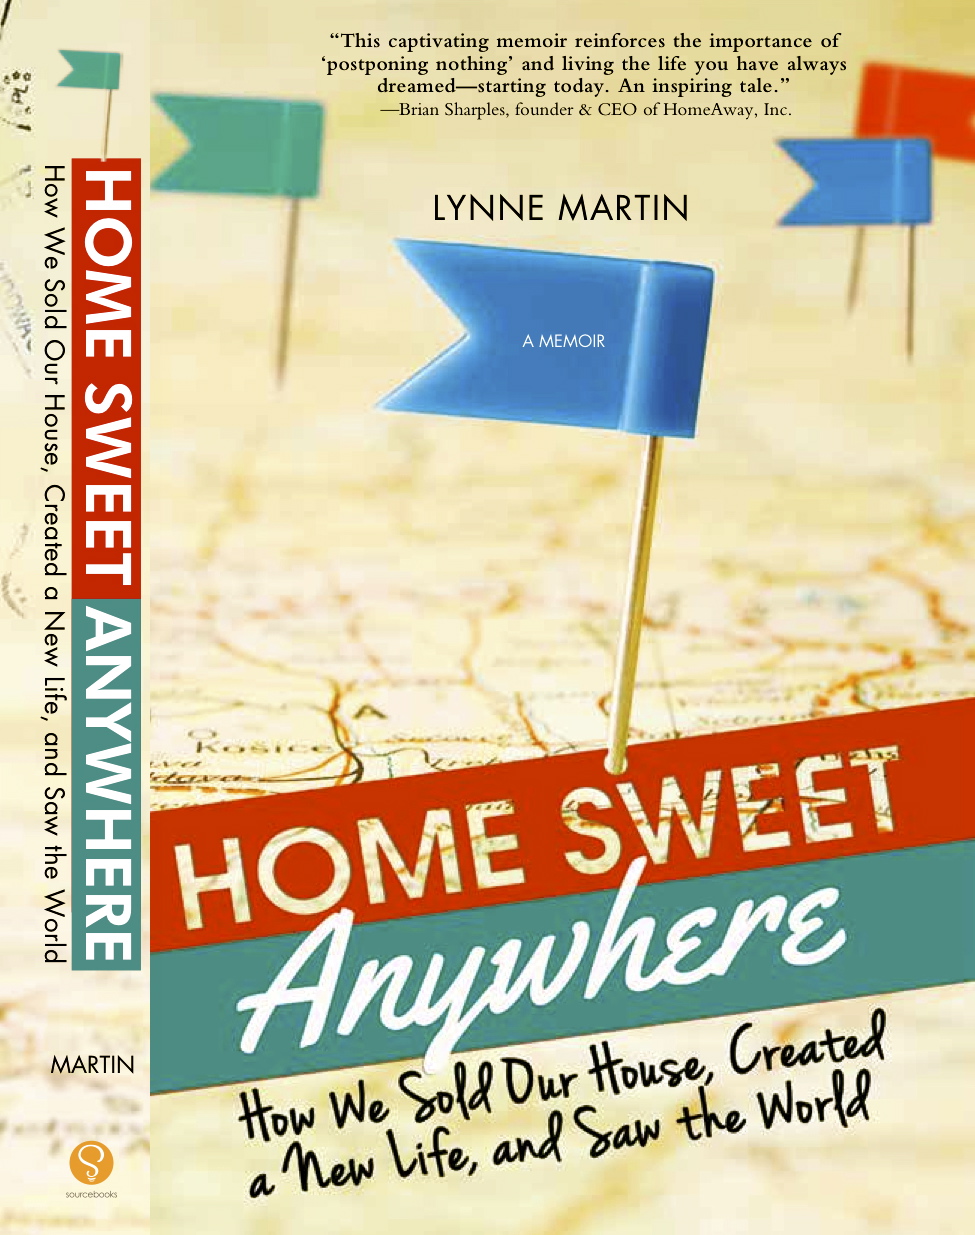 Book reviews: Home Sweet Anywhere